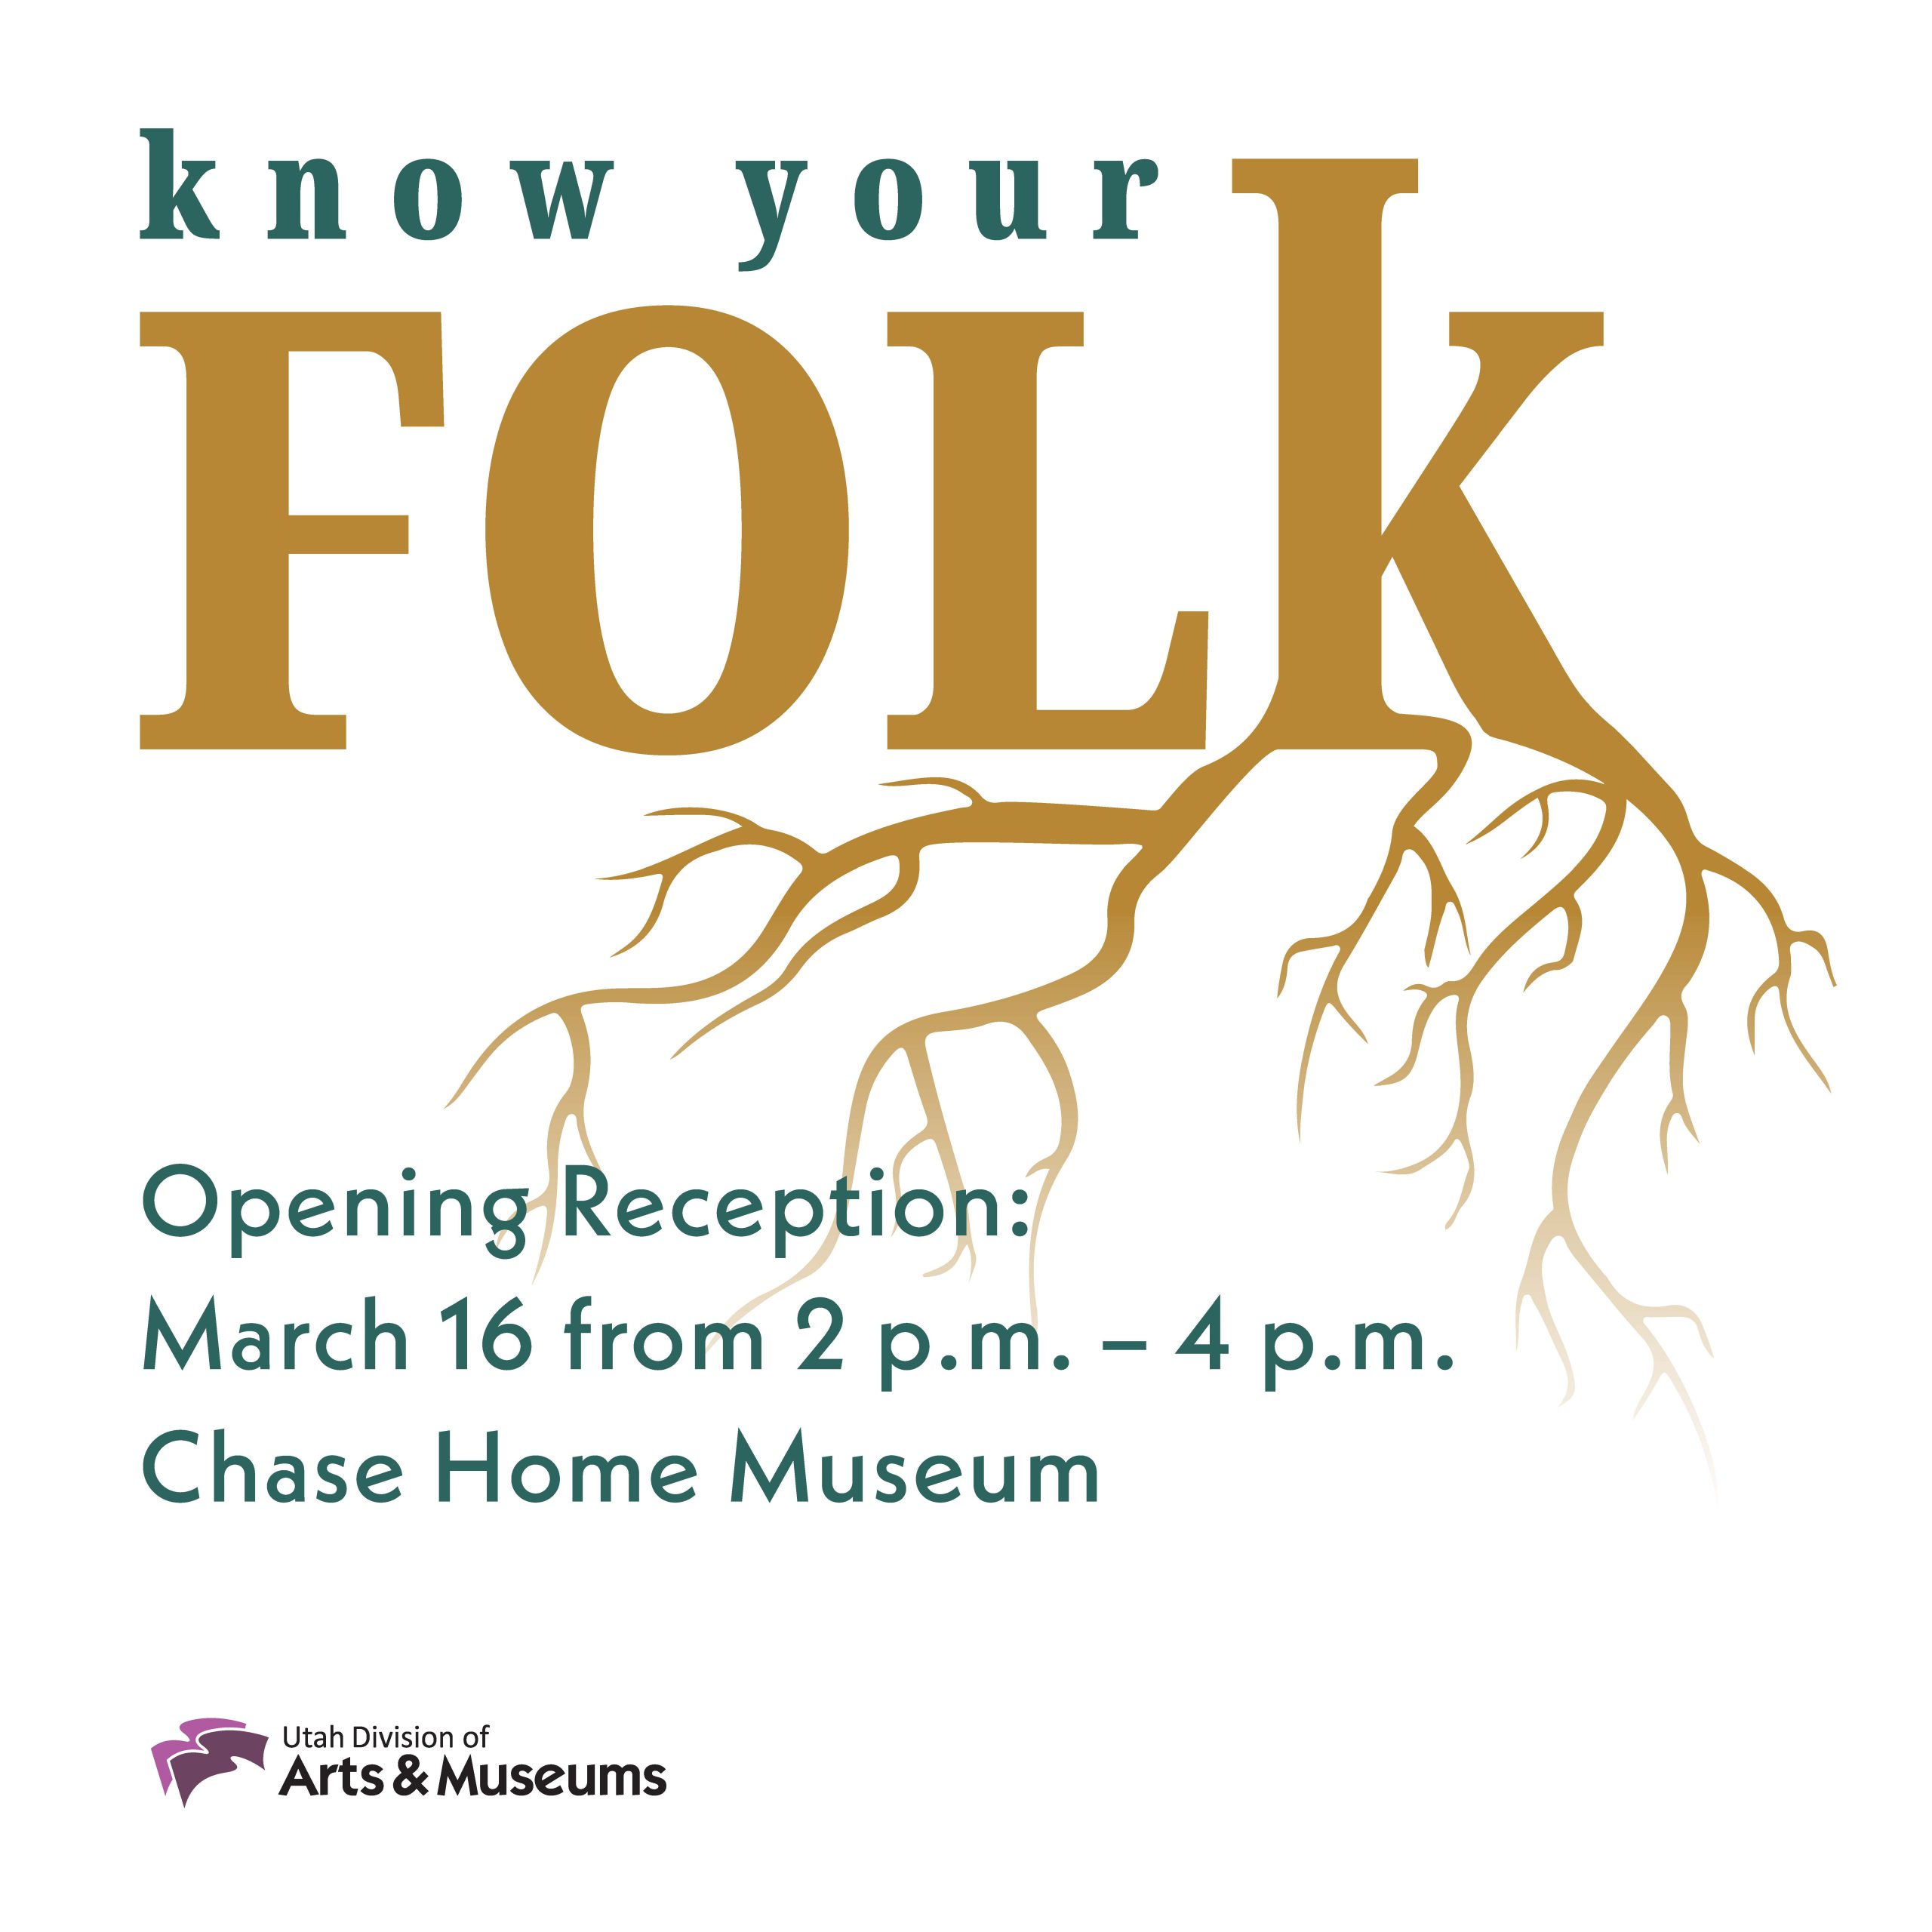 Know Your Folk. Opening Reception: March 16 from 2 p.m. - 4 p.m. Chase Home Museum.